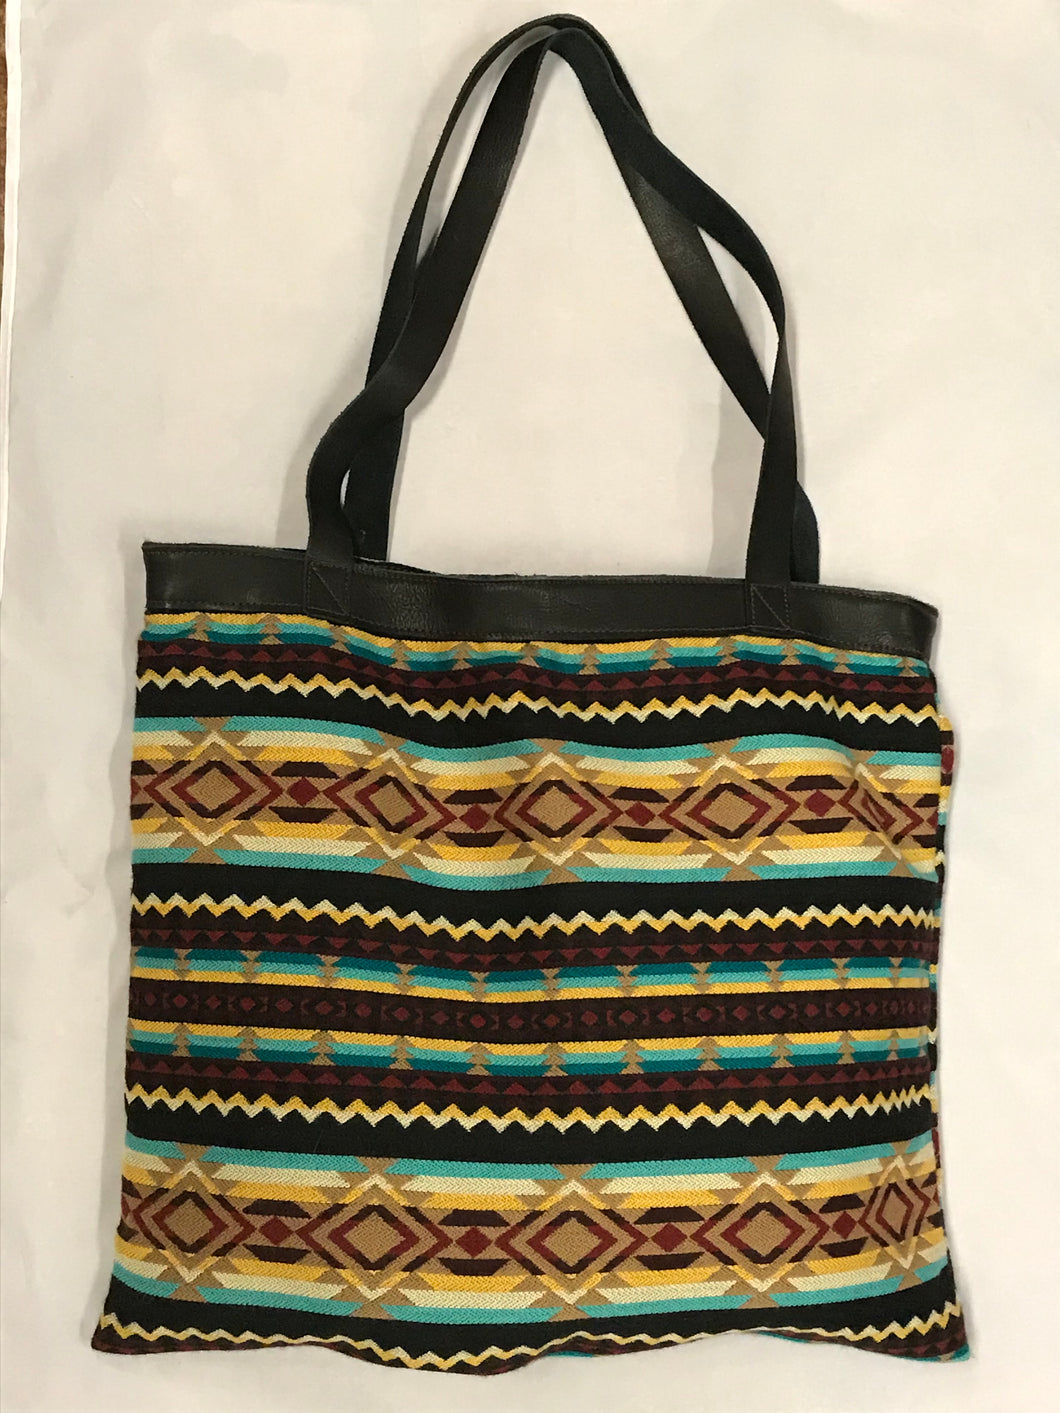 Cream, Brown, and Teal Striped Woven XL Tote Bag